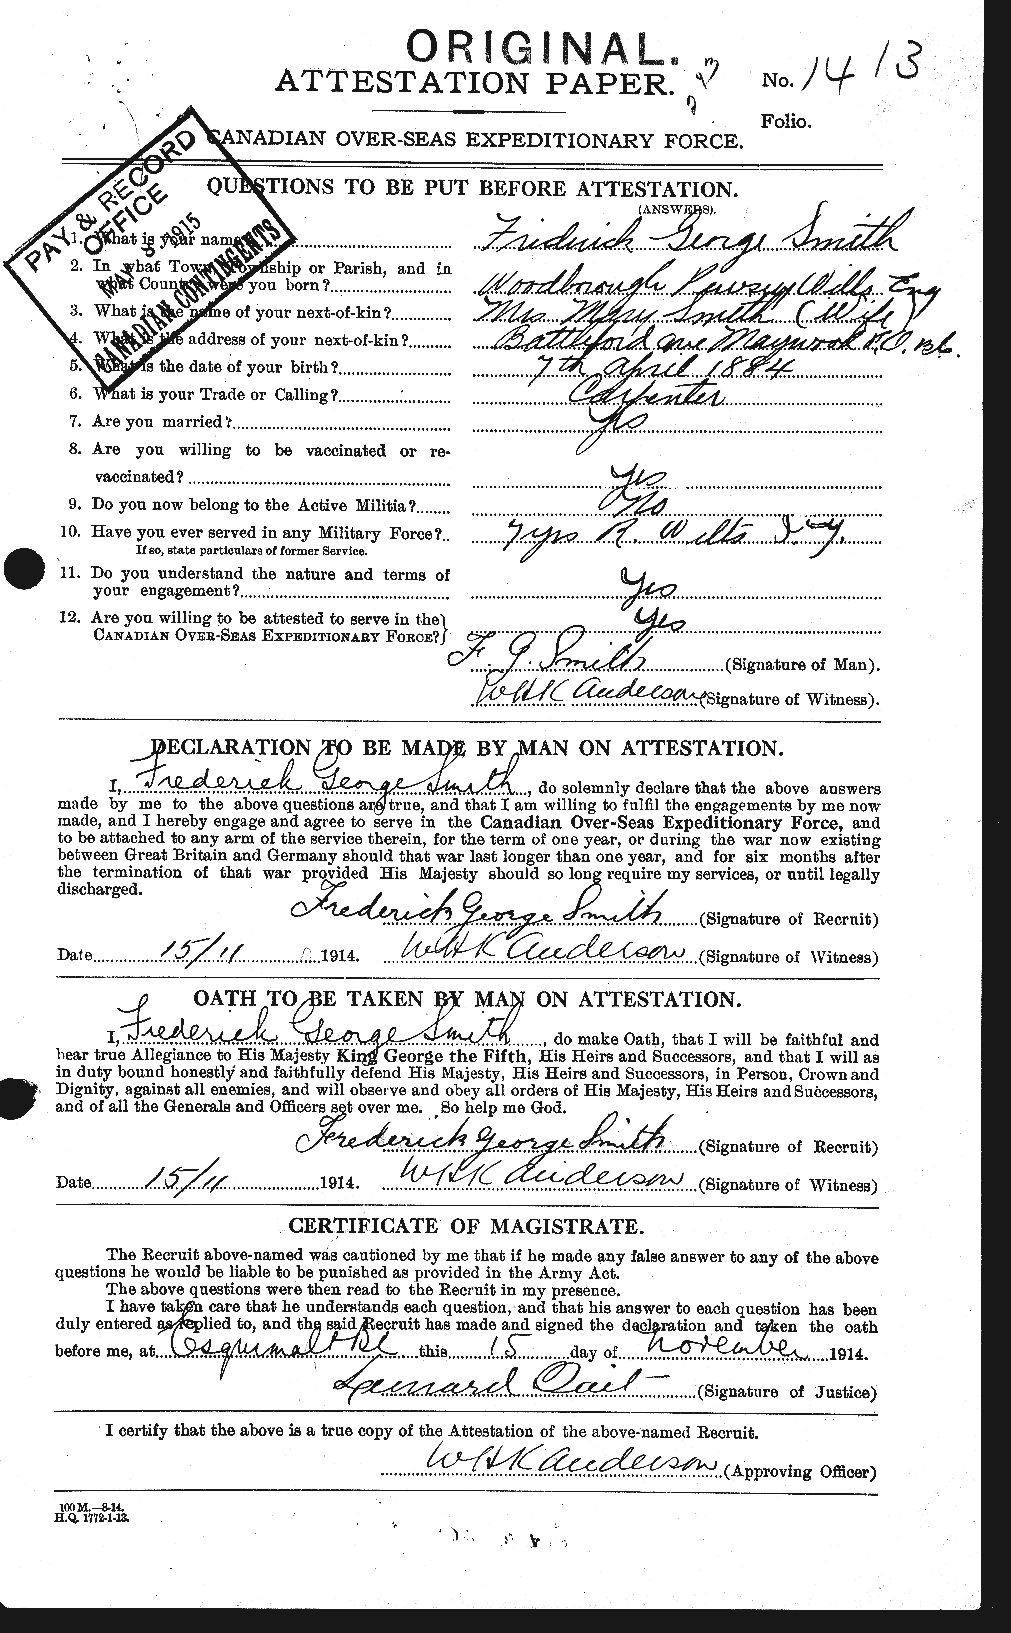 Personnel Records of the First World War - CEF 103703a